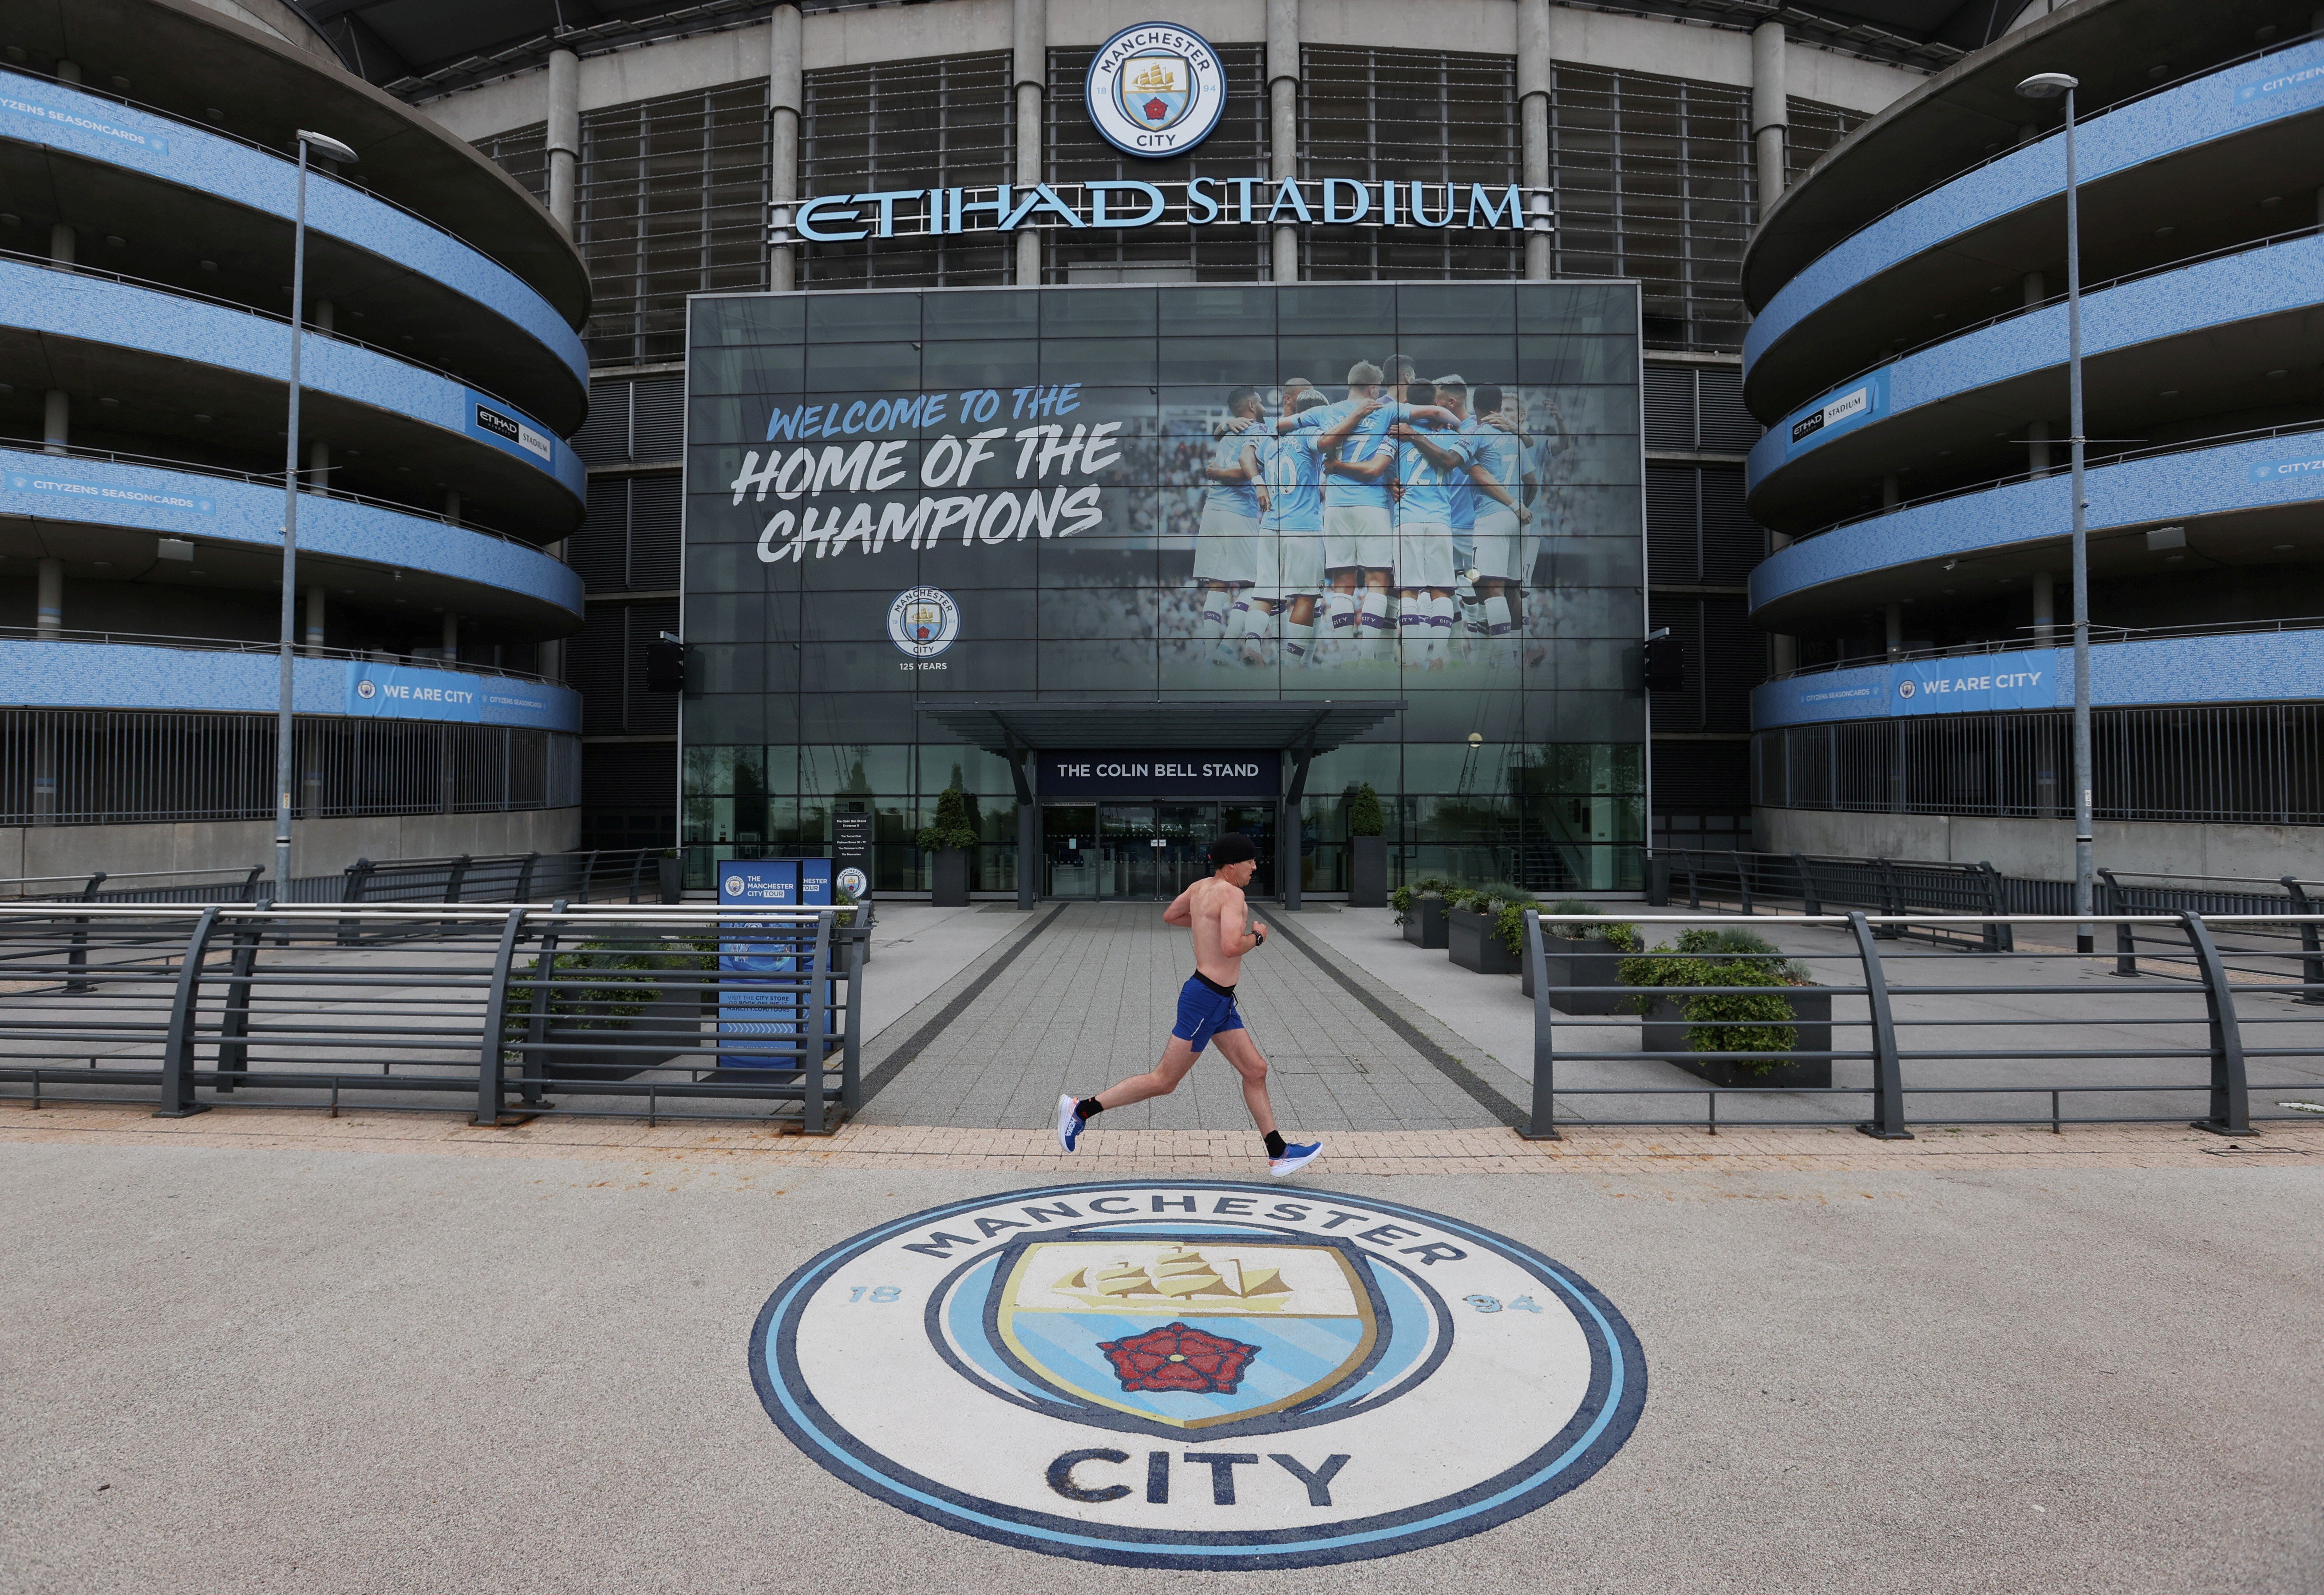 An unfavourable decision at the Court of Arbitration for Sport next week could have disastrous consequences for reigning Premier League champions Manchester City. Photo: Reuters